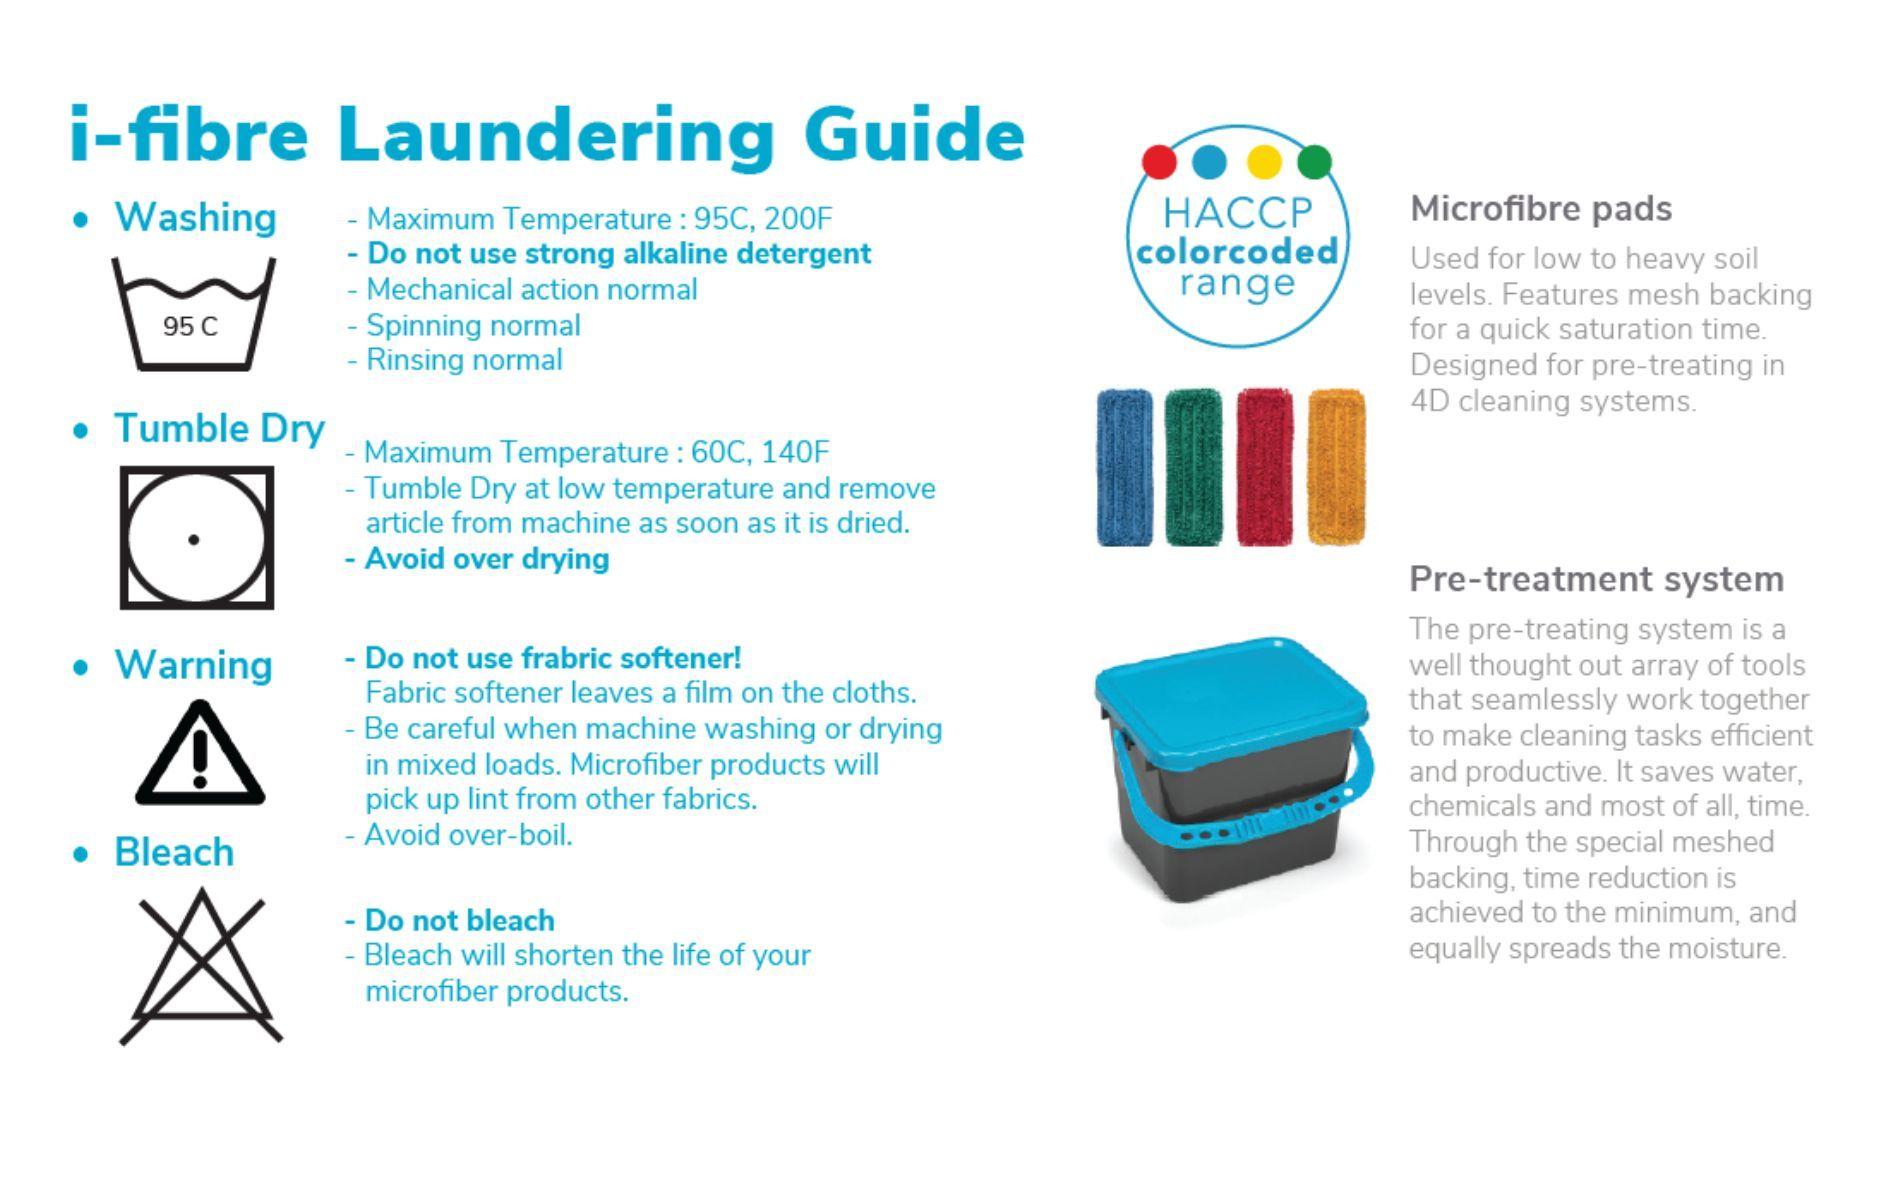 Laundering guide